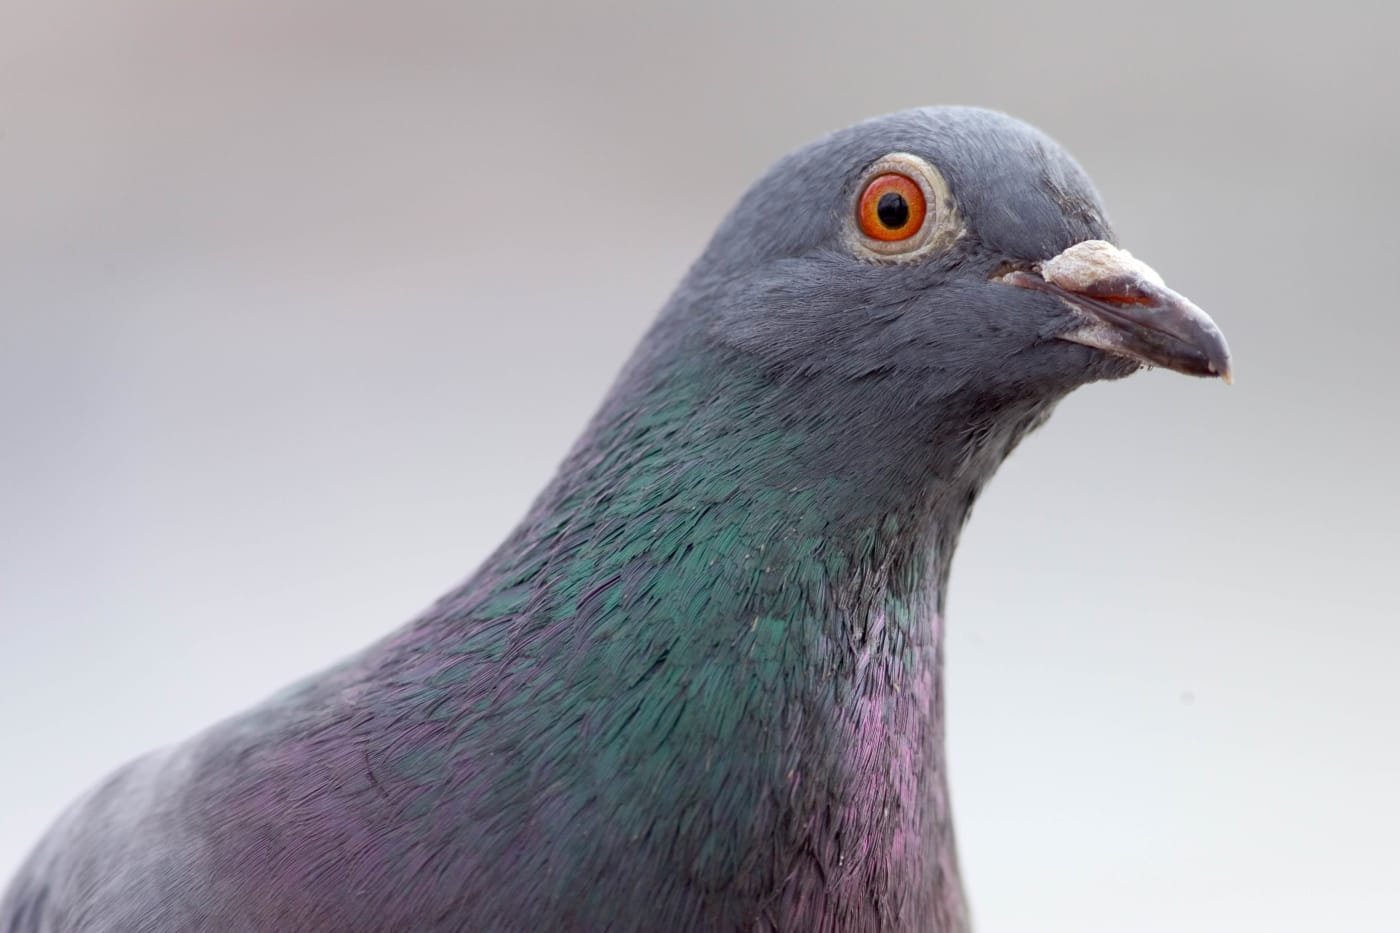 Pigeon staring into the distance